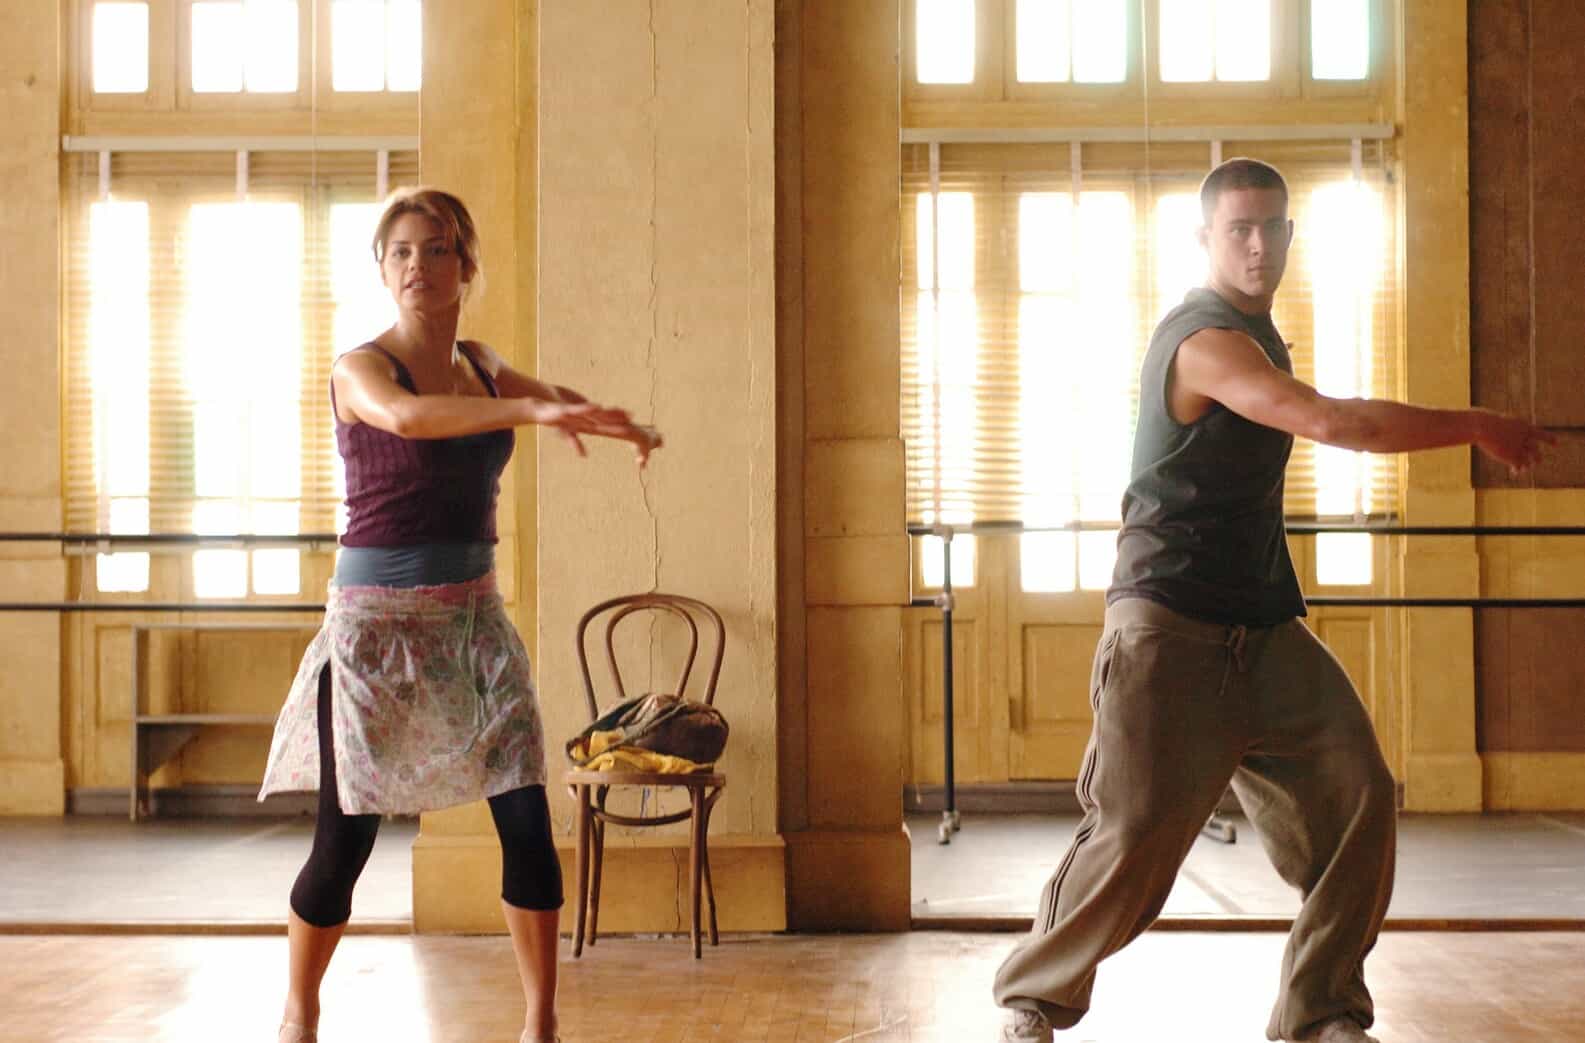 A girl and boy practice a dance routine in a ballet studio in this image from Touchstone Pictures.